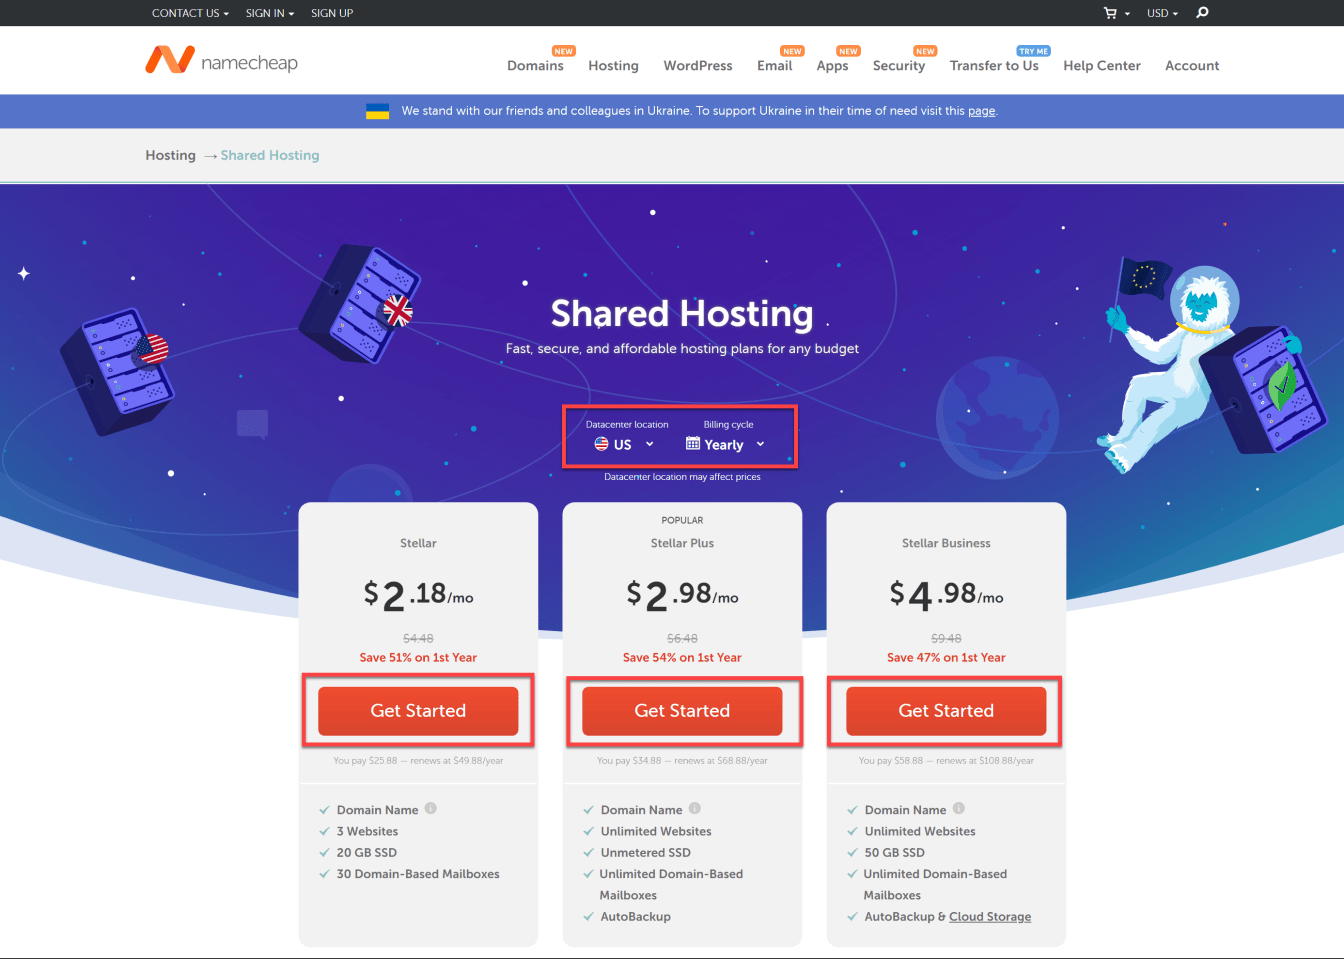 Step #1 - Activate the discount on Namecheap Hosting.